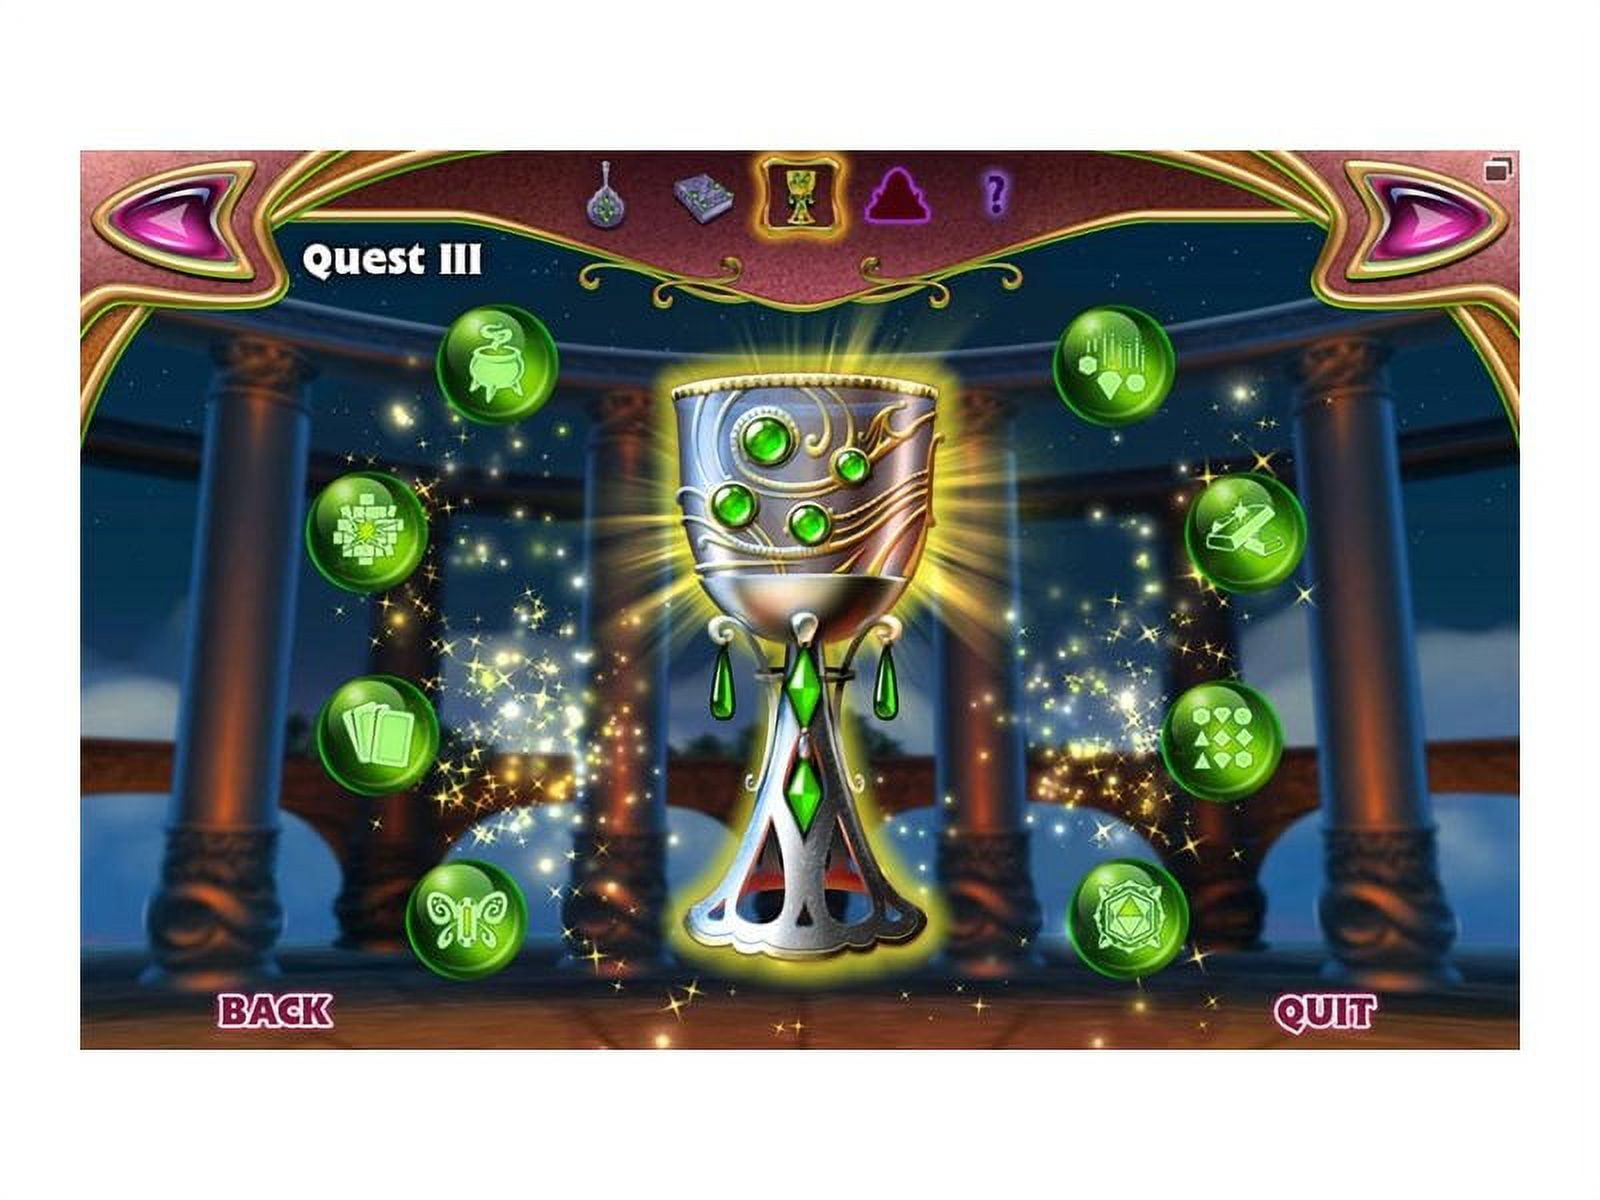 Bejeweled 3 Review - Bejeweled 3 Review: PopCap Takes Its Flagship